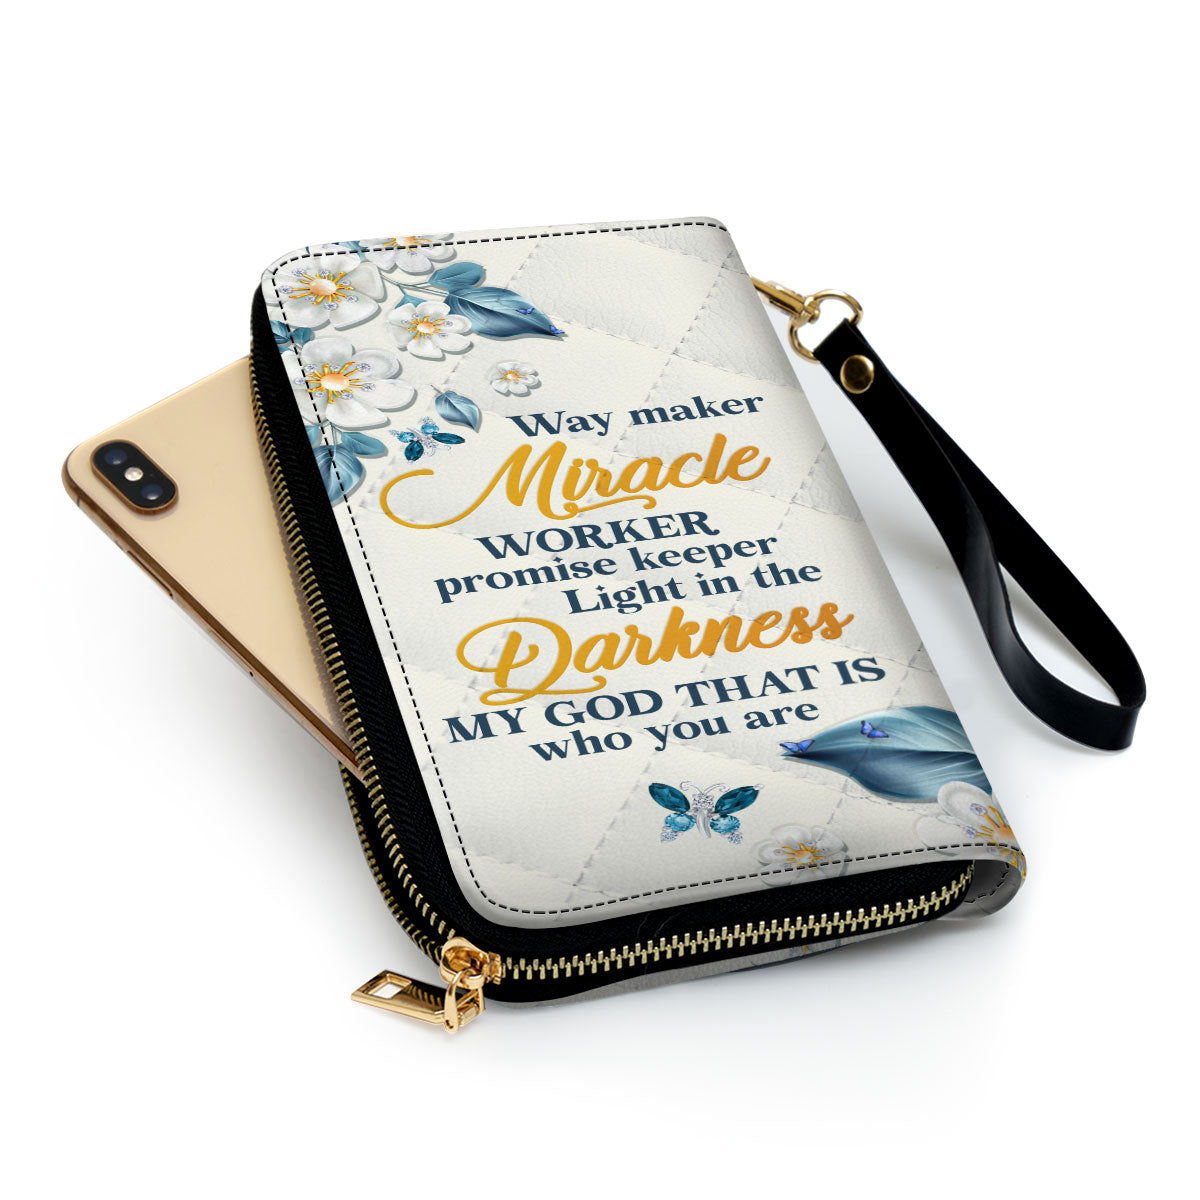 Way Maker And Miracle Worker Flower And Butterfly Clutch Purse For Women - Personalized Name - Christian Gifts For Women